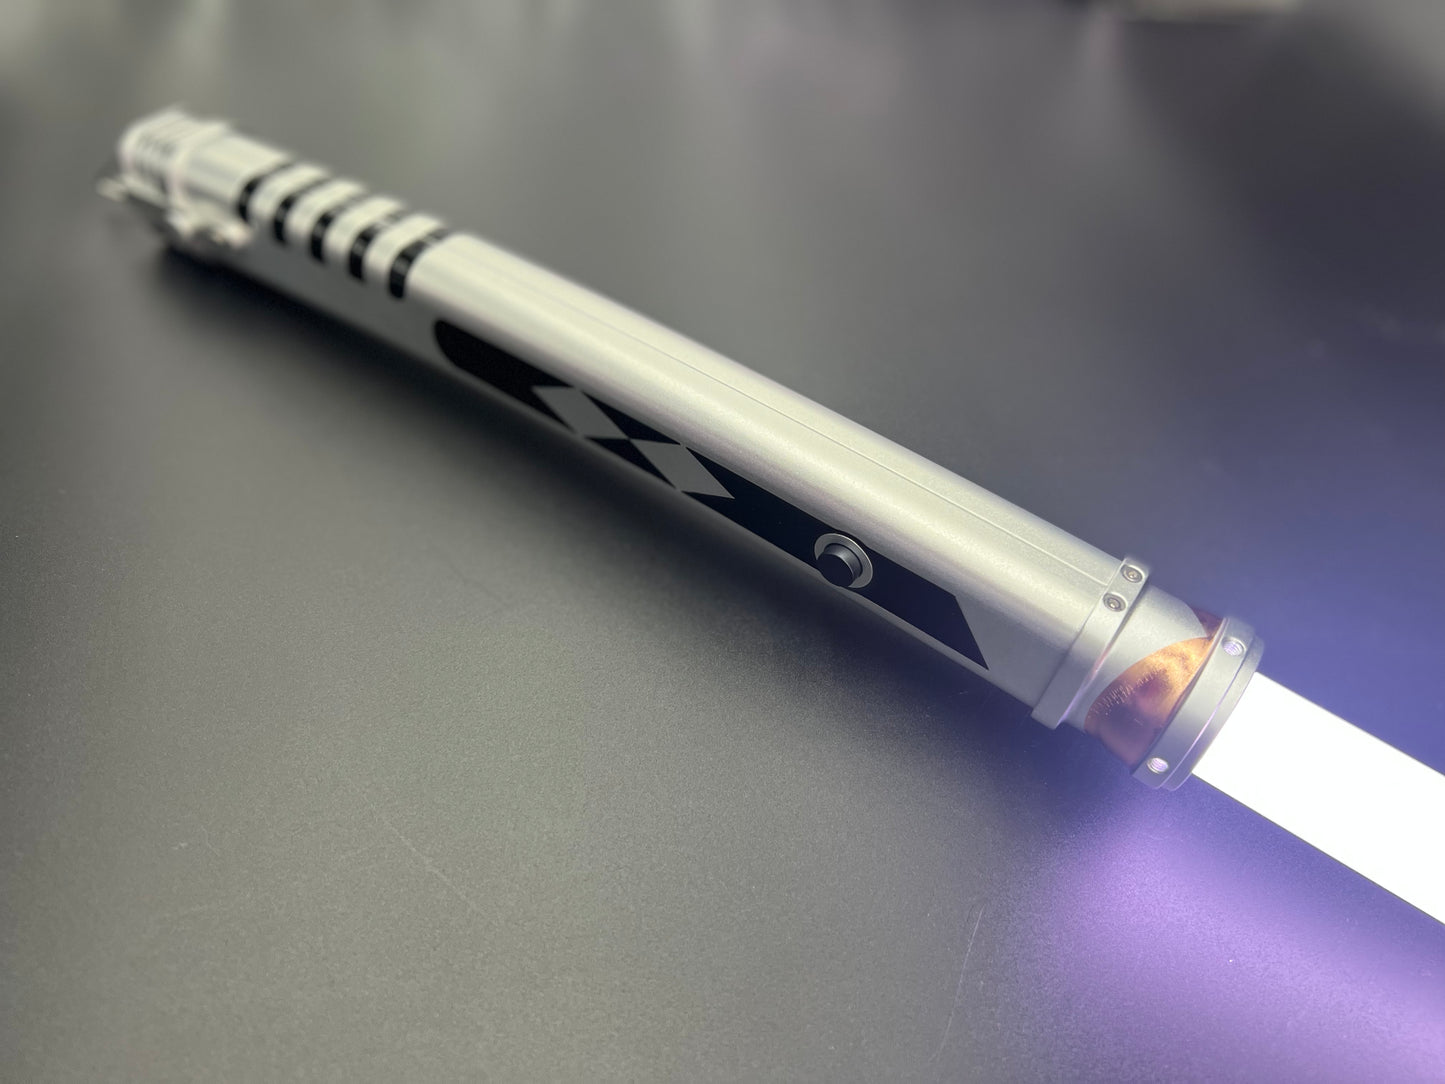 THE FULCRUM TANO CHALLENGER LIGHTSABER